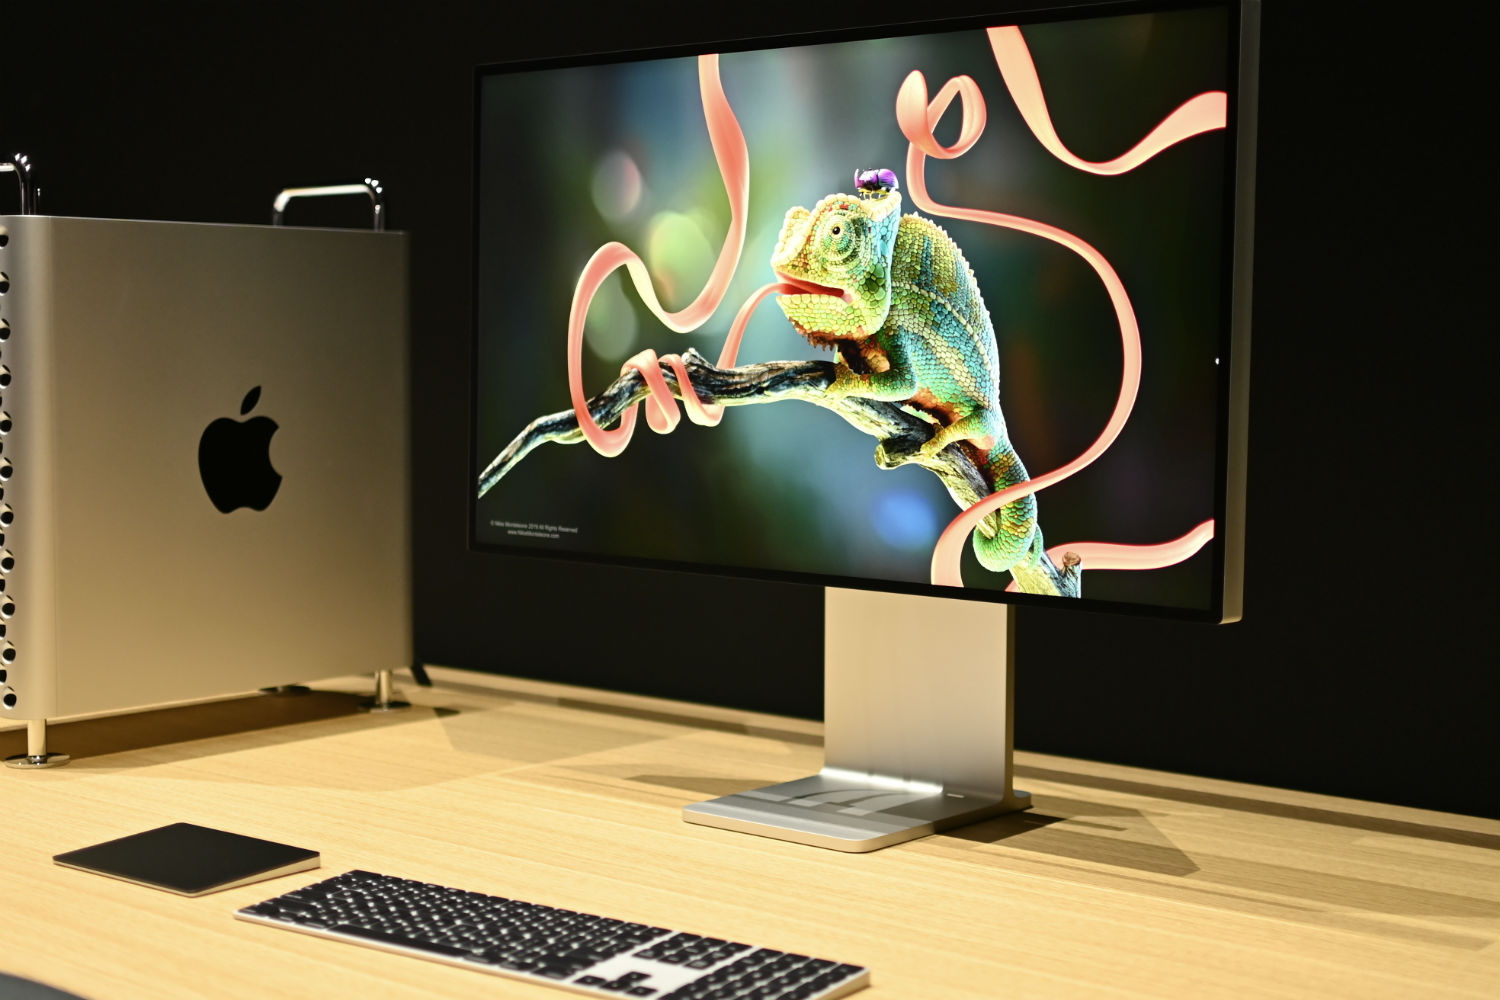 The Apple silicon iMac Pro we want might arrive in 2023